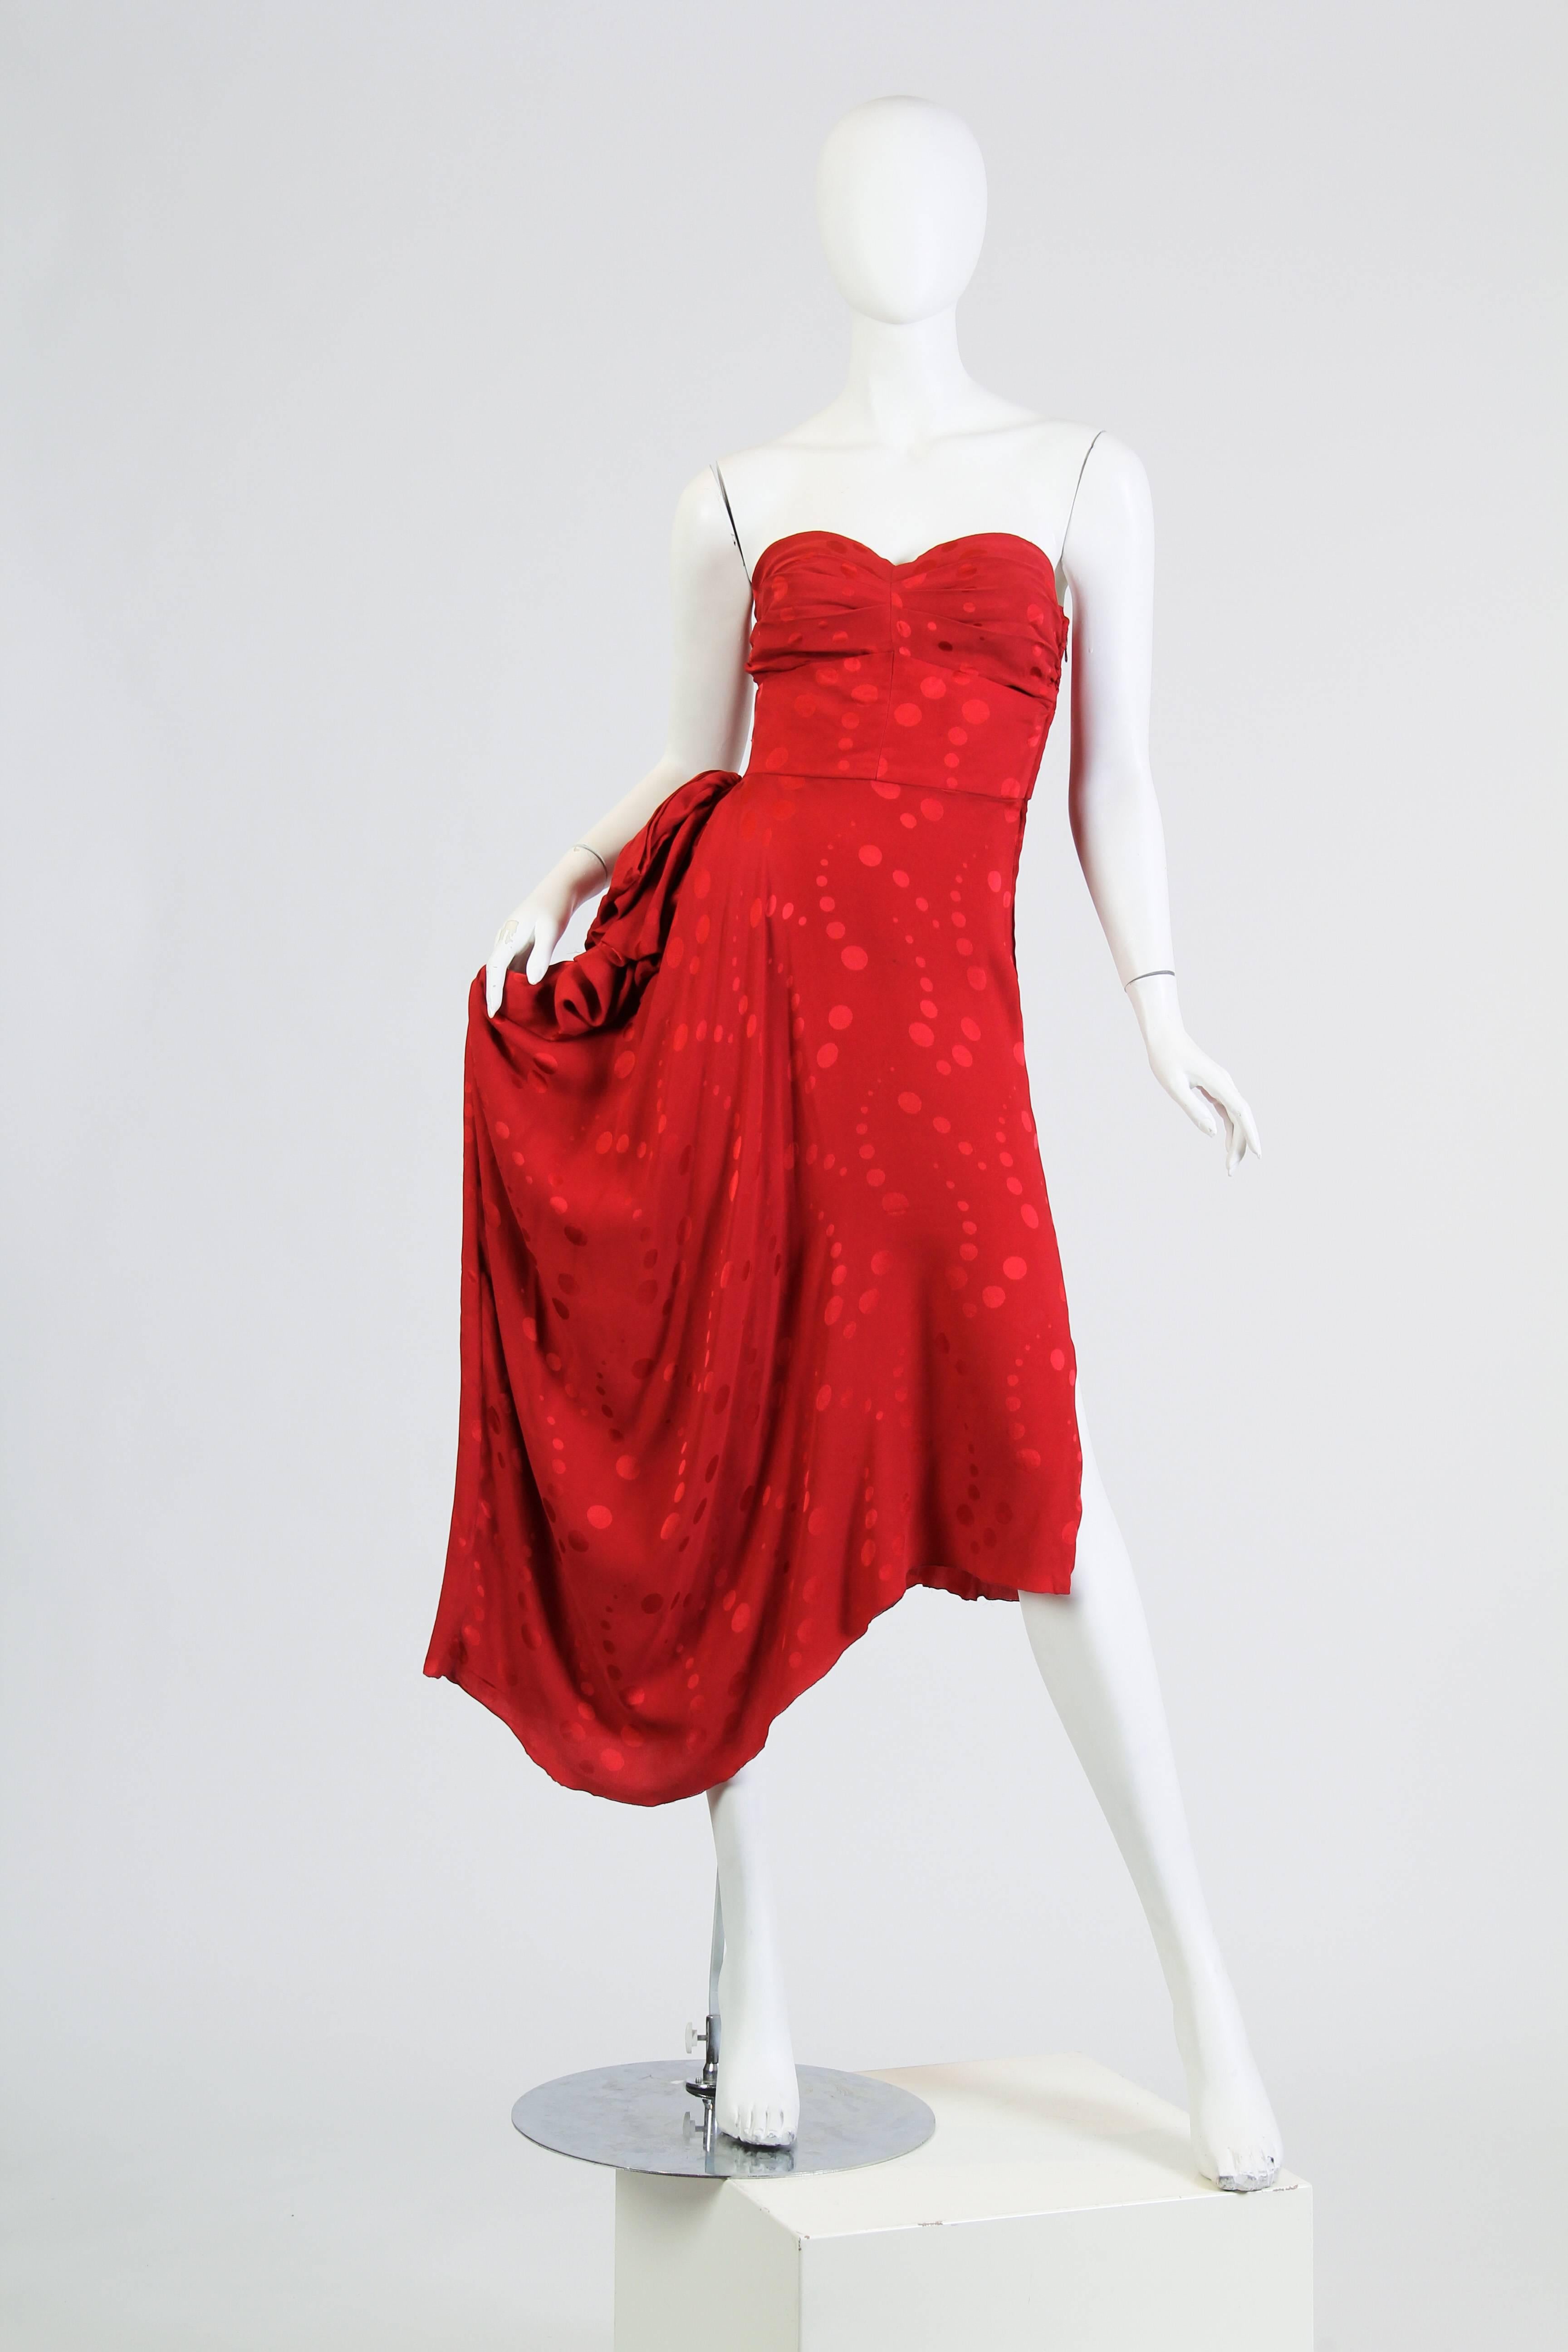 1970s Vicky Tiel Red Dress with Slit. Rare to find a 1970s Vicky Tiel dress from the late 1970s. This dress is leaning towards her more famous heavily constructed dresses of the 1980s yet has a softer semi-bias cut and draped skirt. 